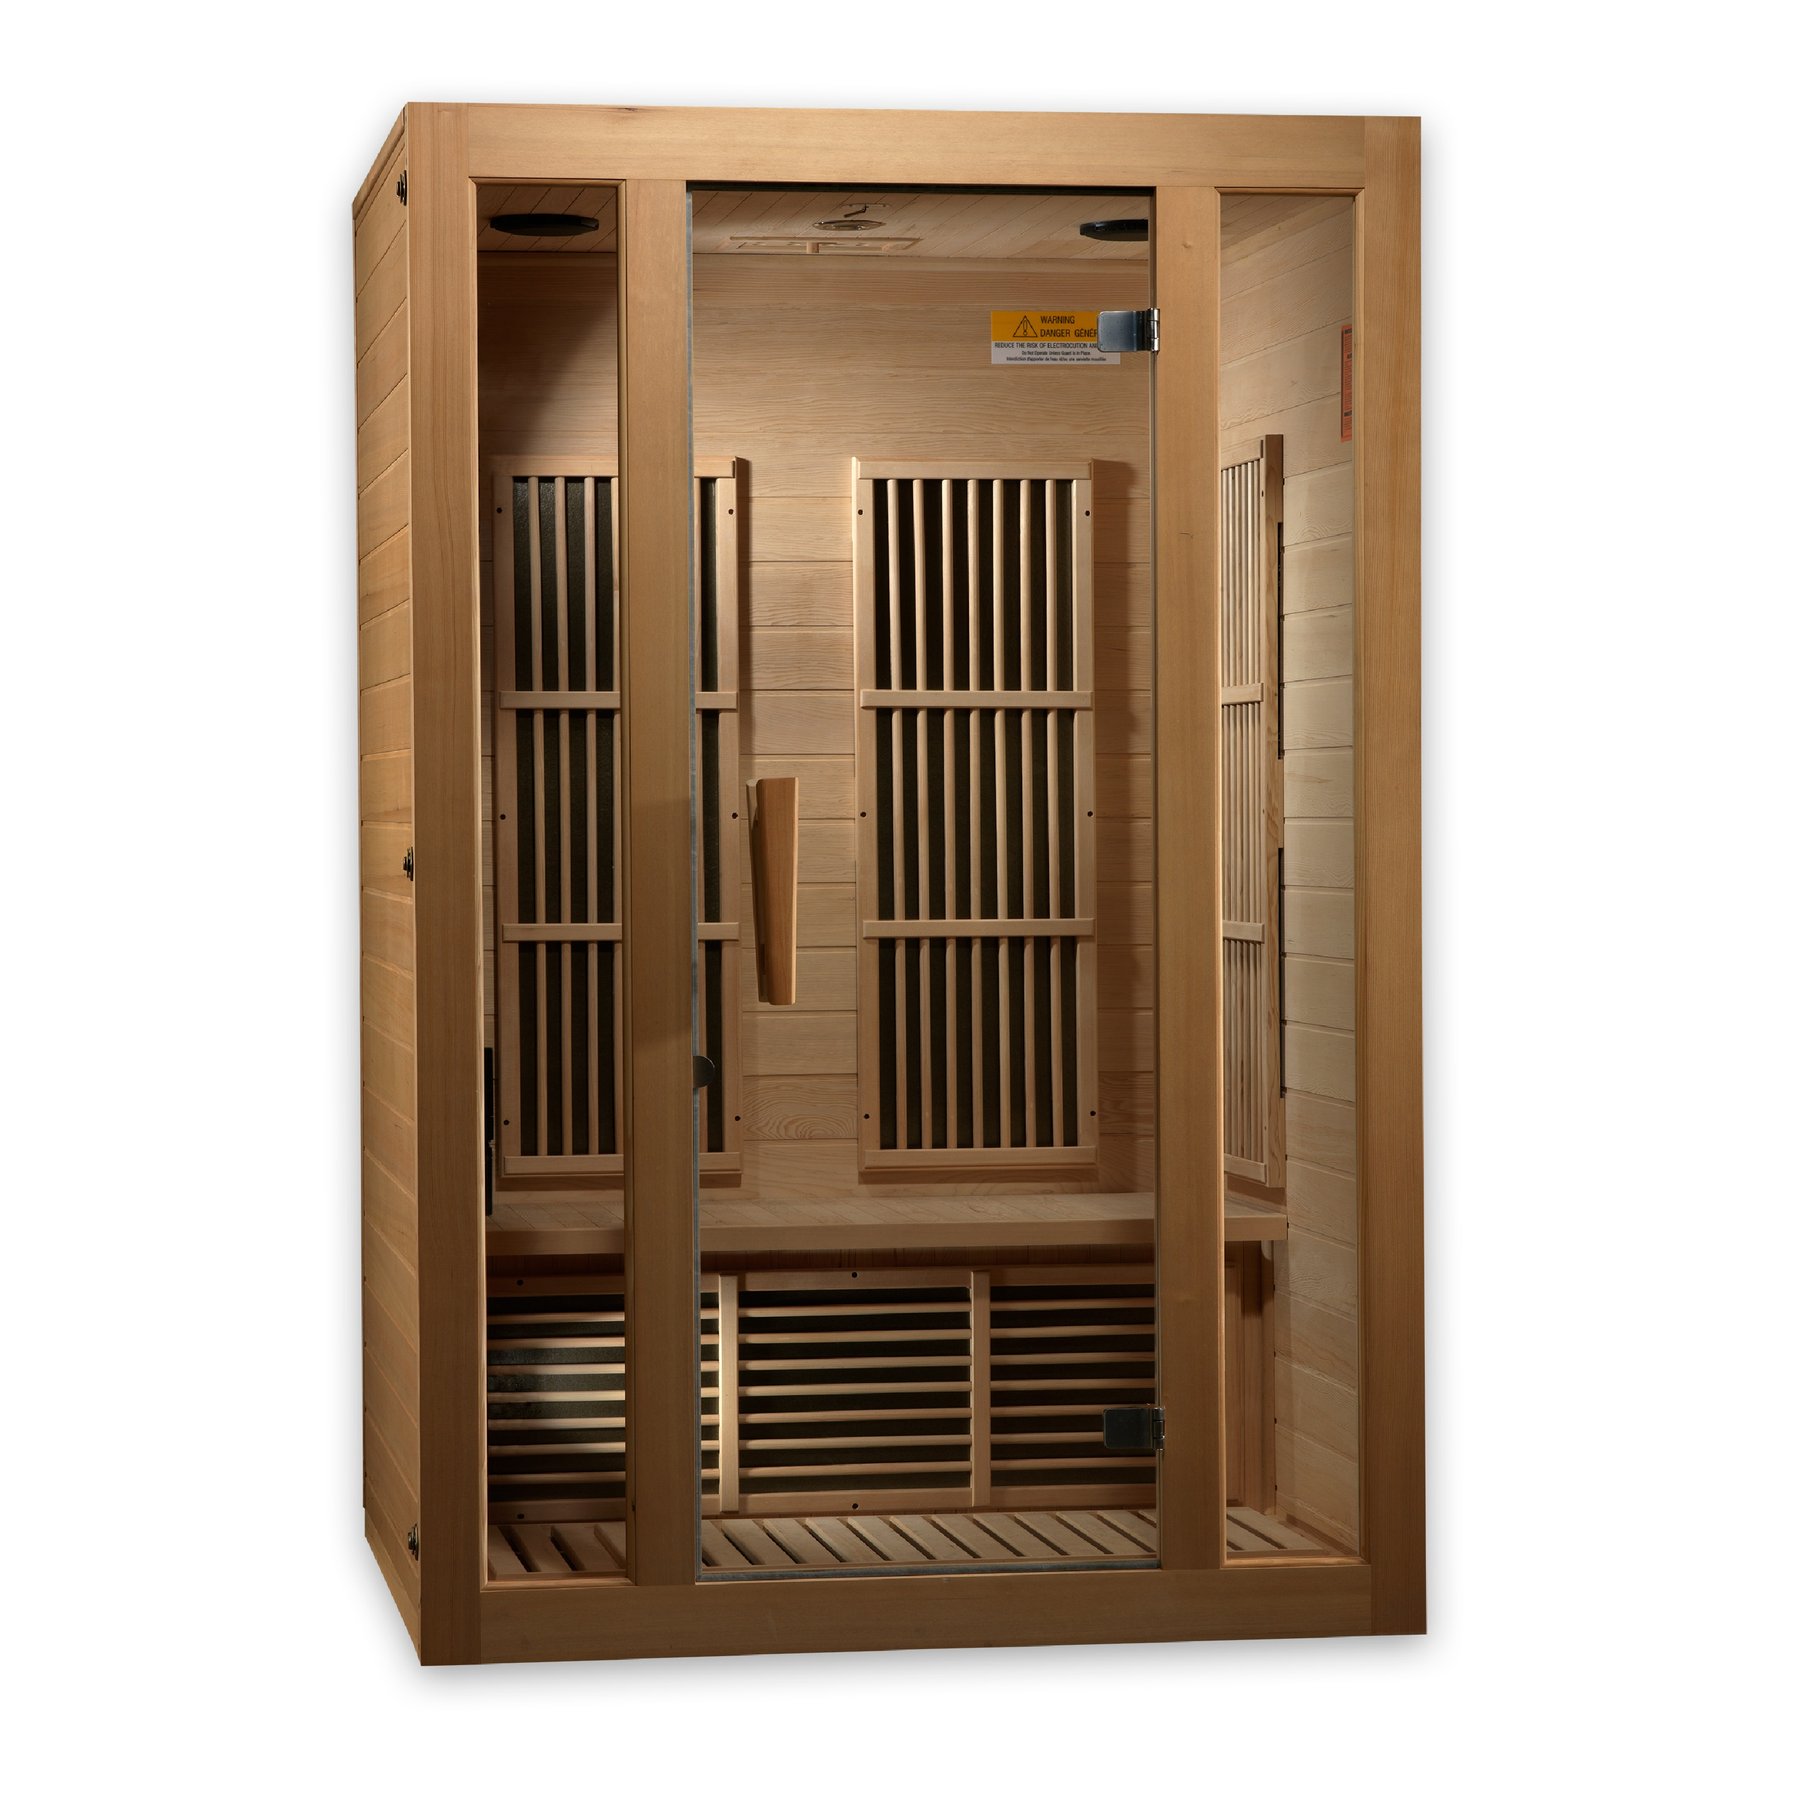 In-Home Far Infrared Sauna: An Alternative Therapy for Fibromyalgia Relief thumbnail